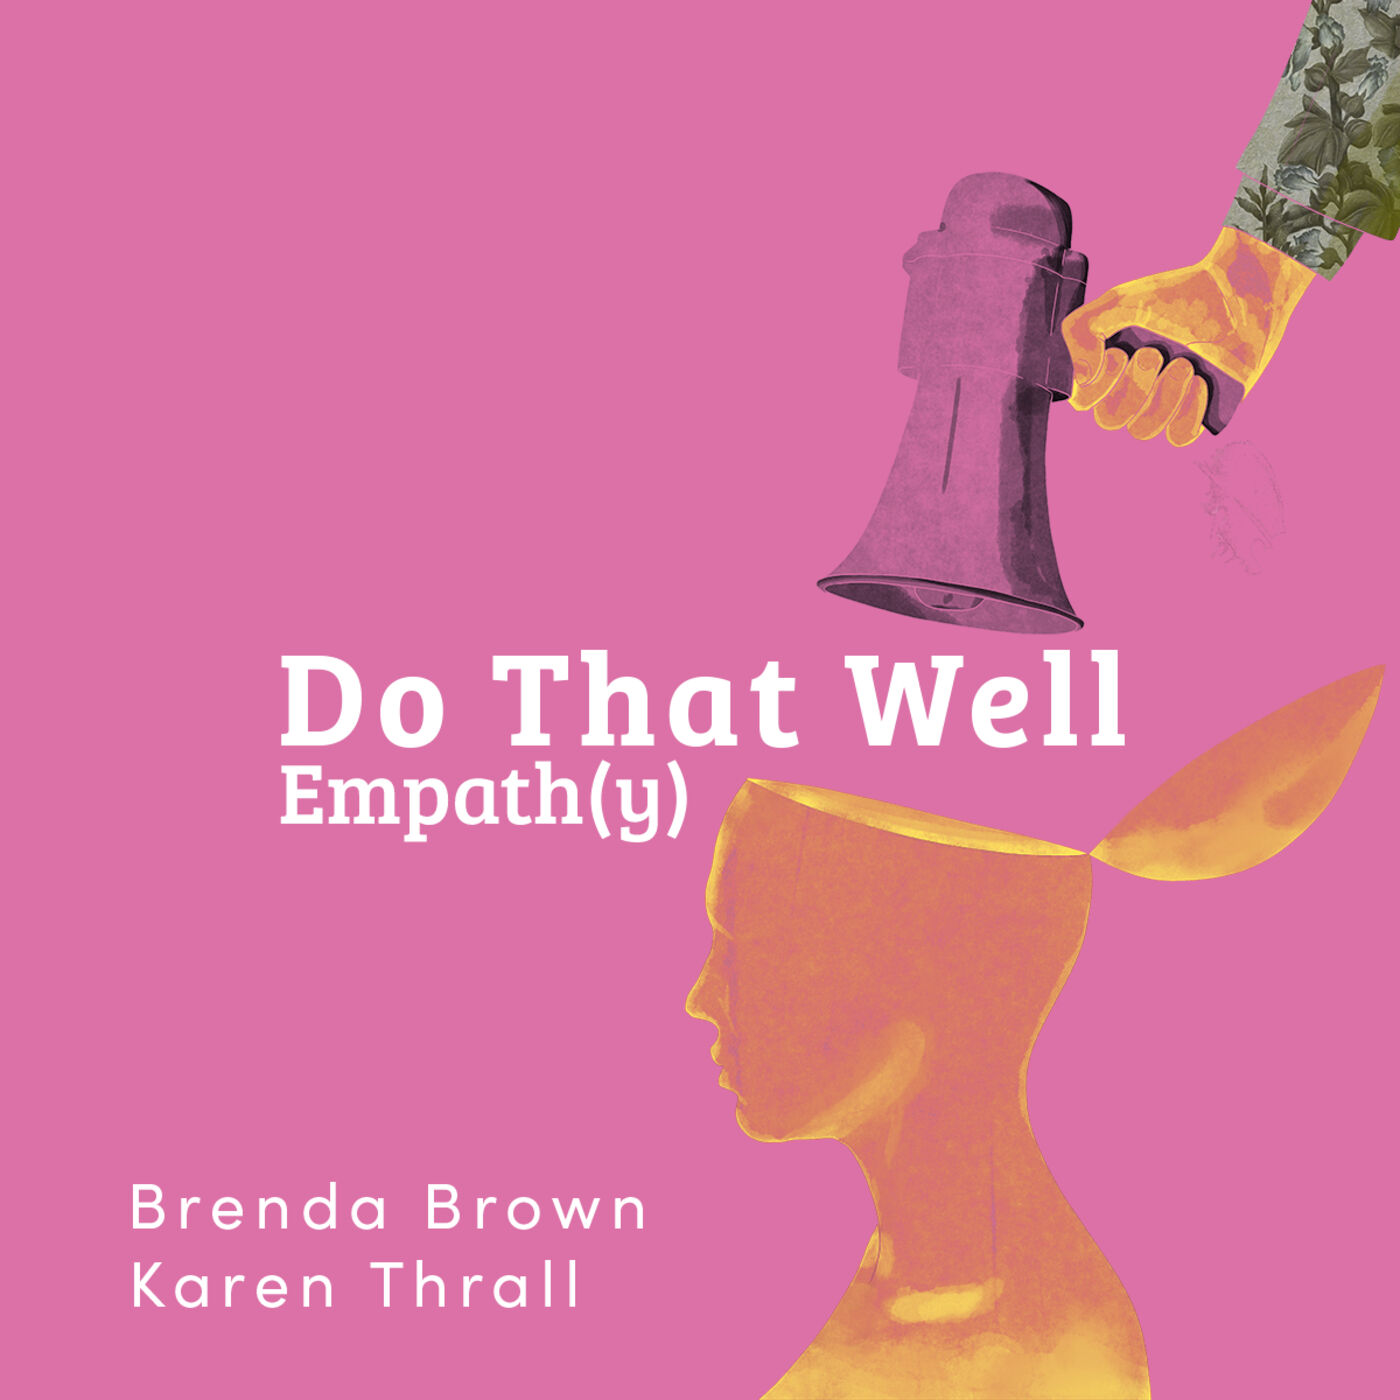 Do That Well: Empath(y)